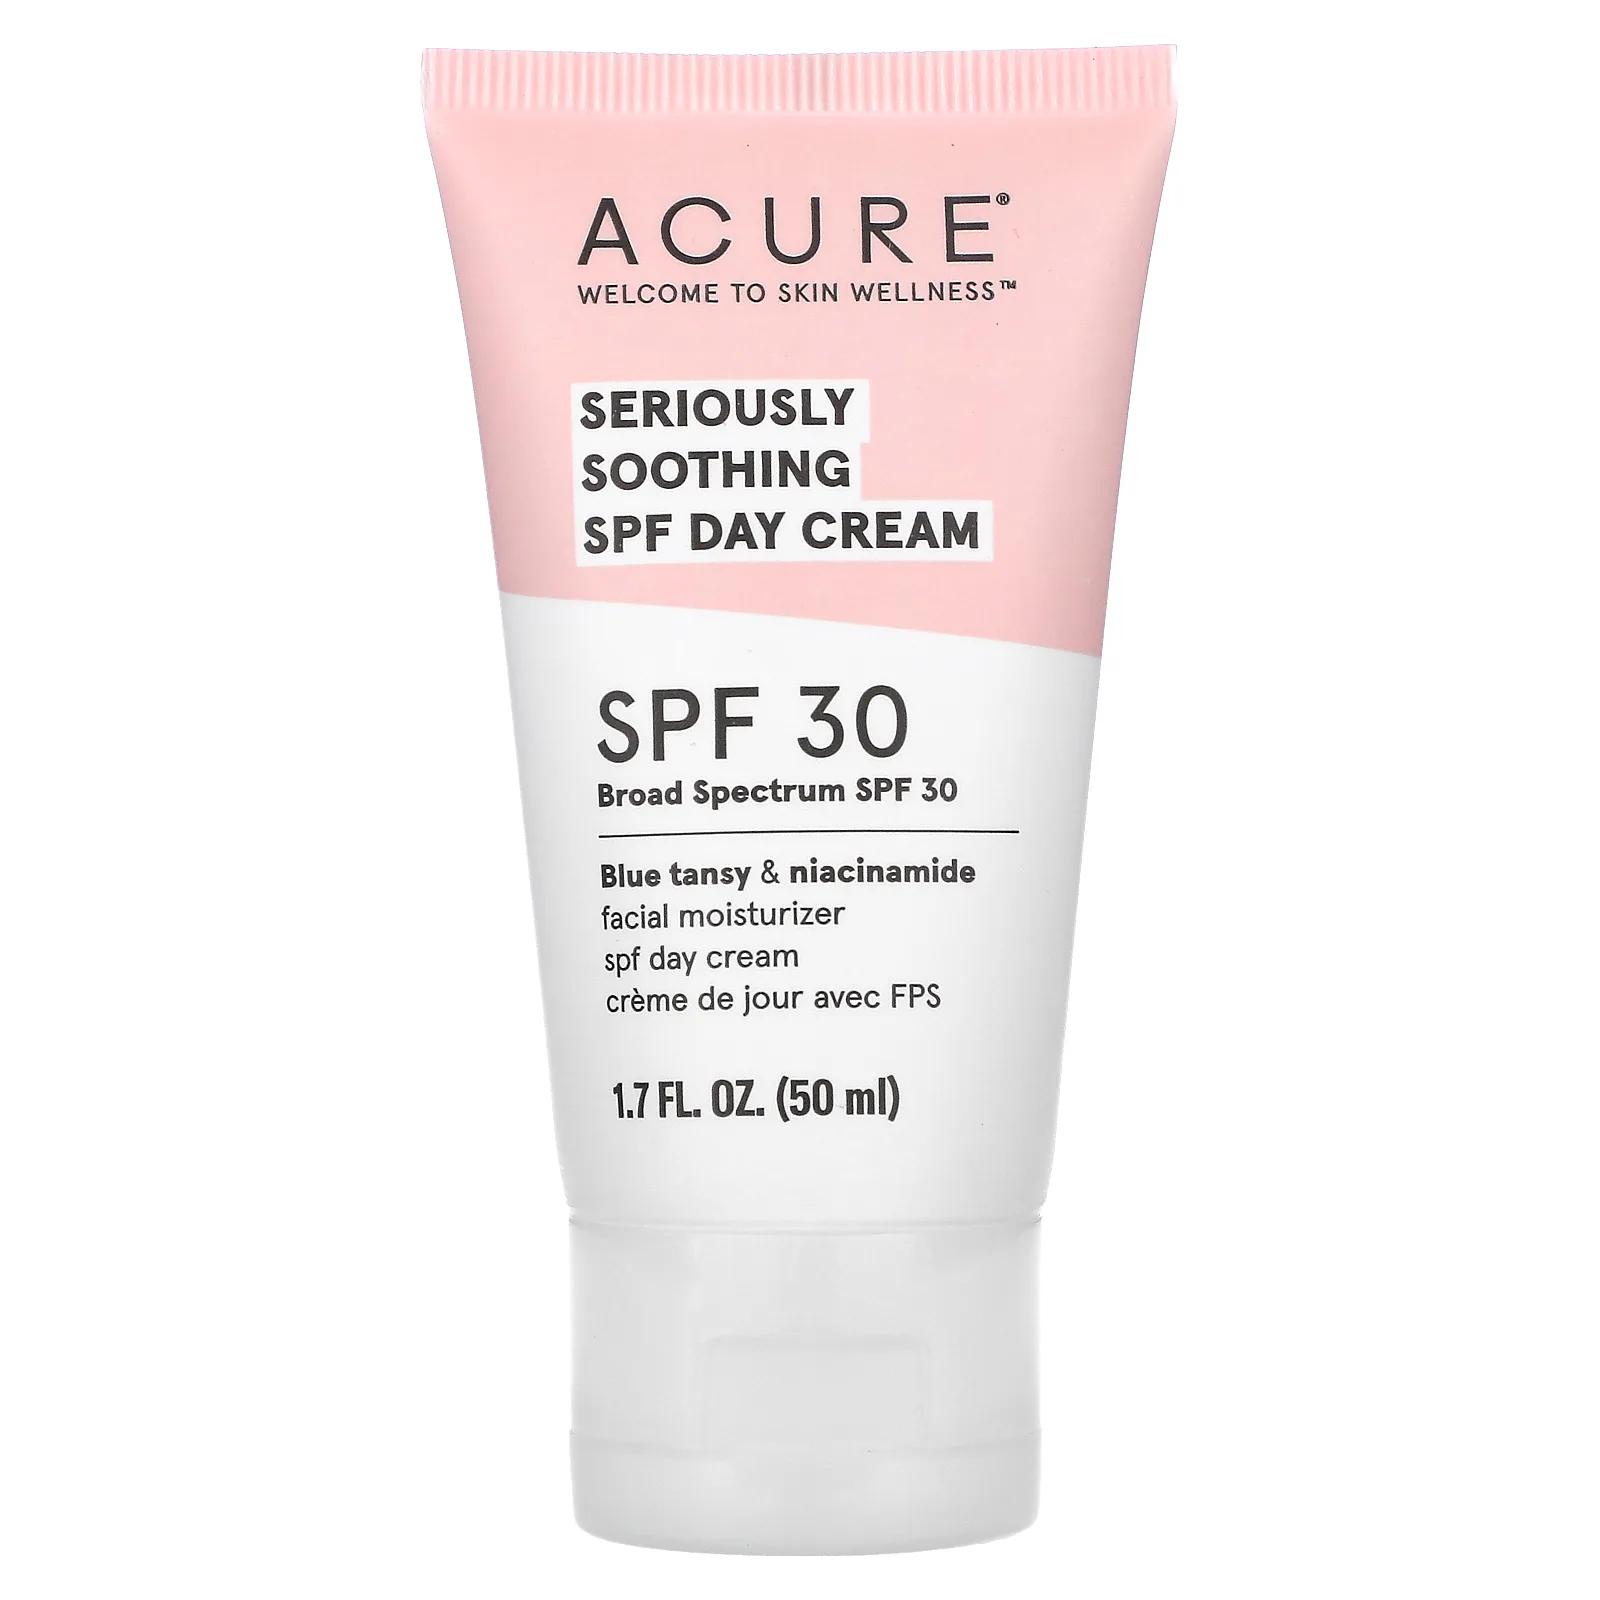 ACURE Seriously Soothing дневной крем с SPF SPF 30 50 мл (1,7 жидк. Унции) acure wave